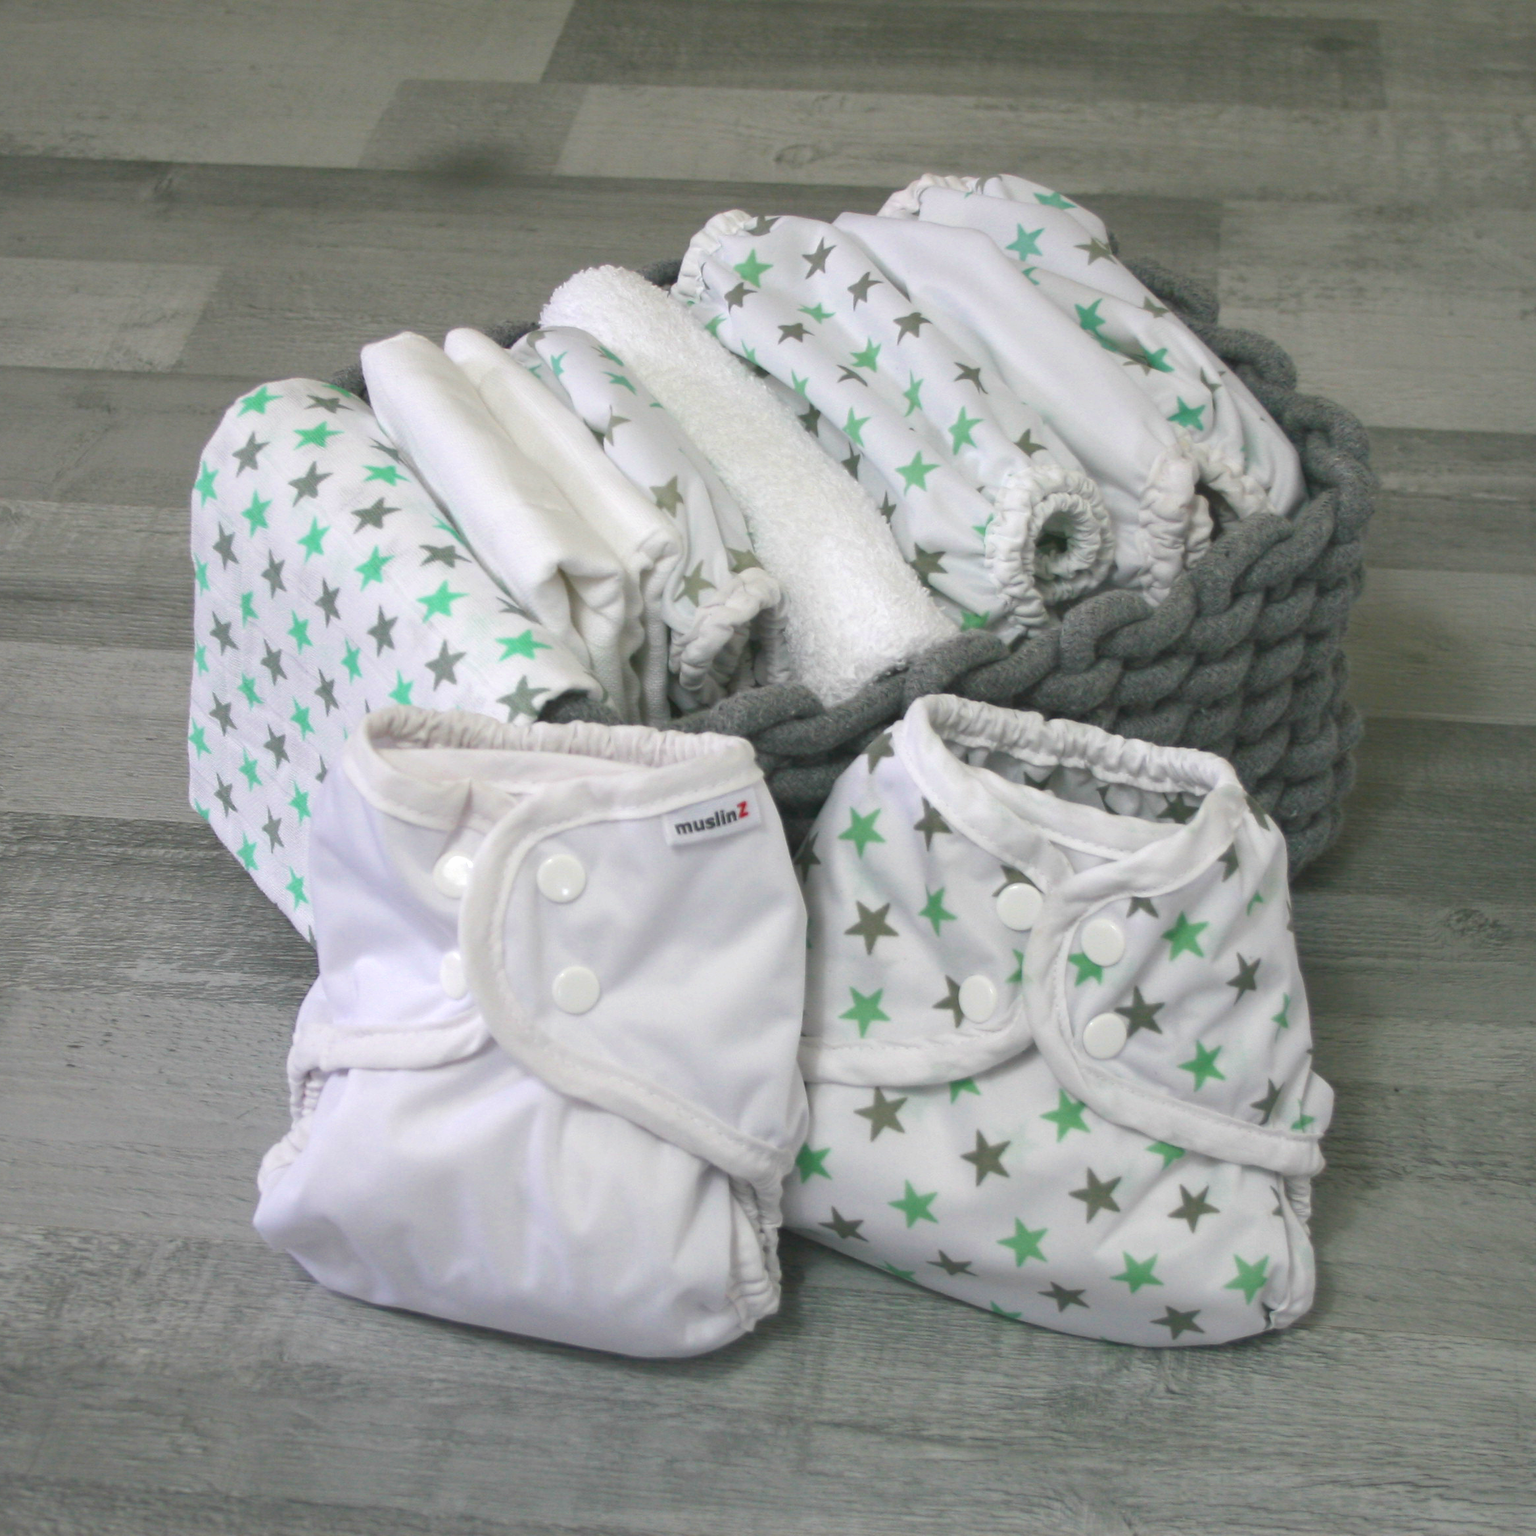 Nappy Lady: The UK's Largest Range of Reusable Nappies